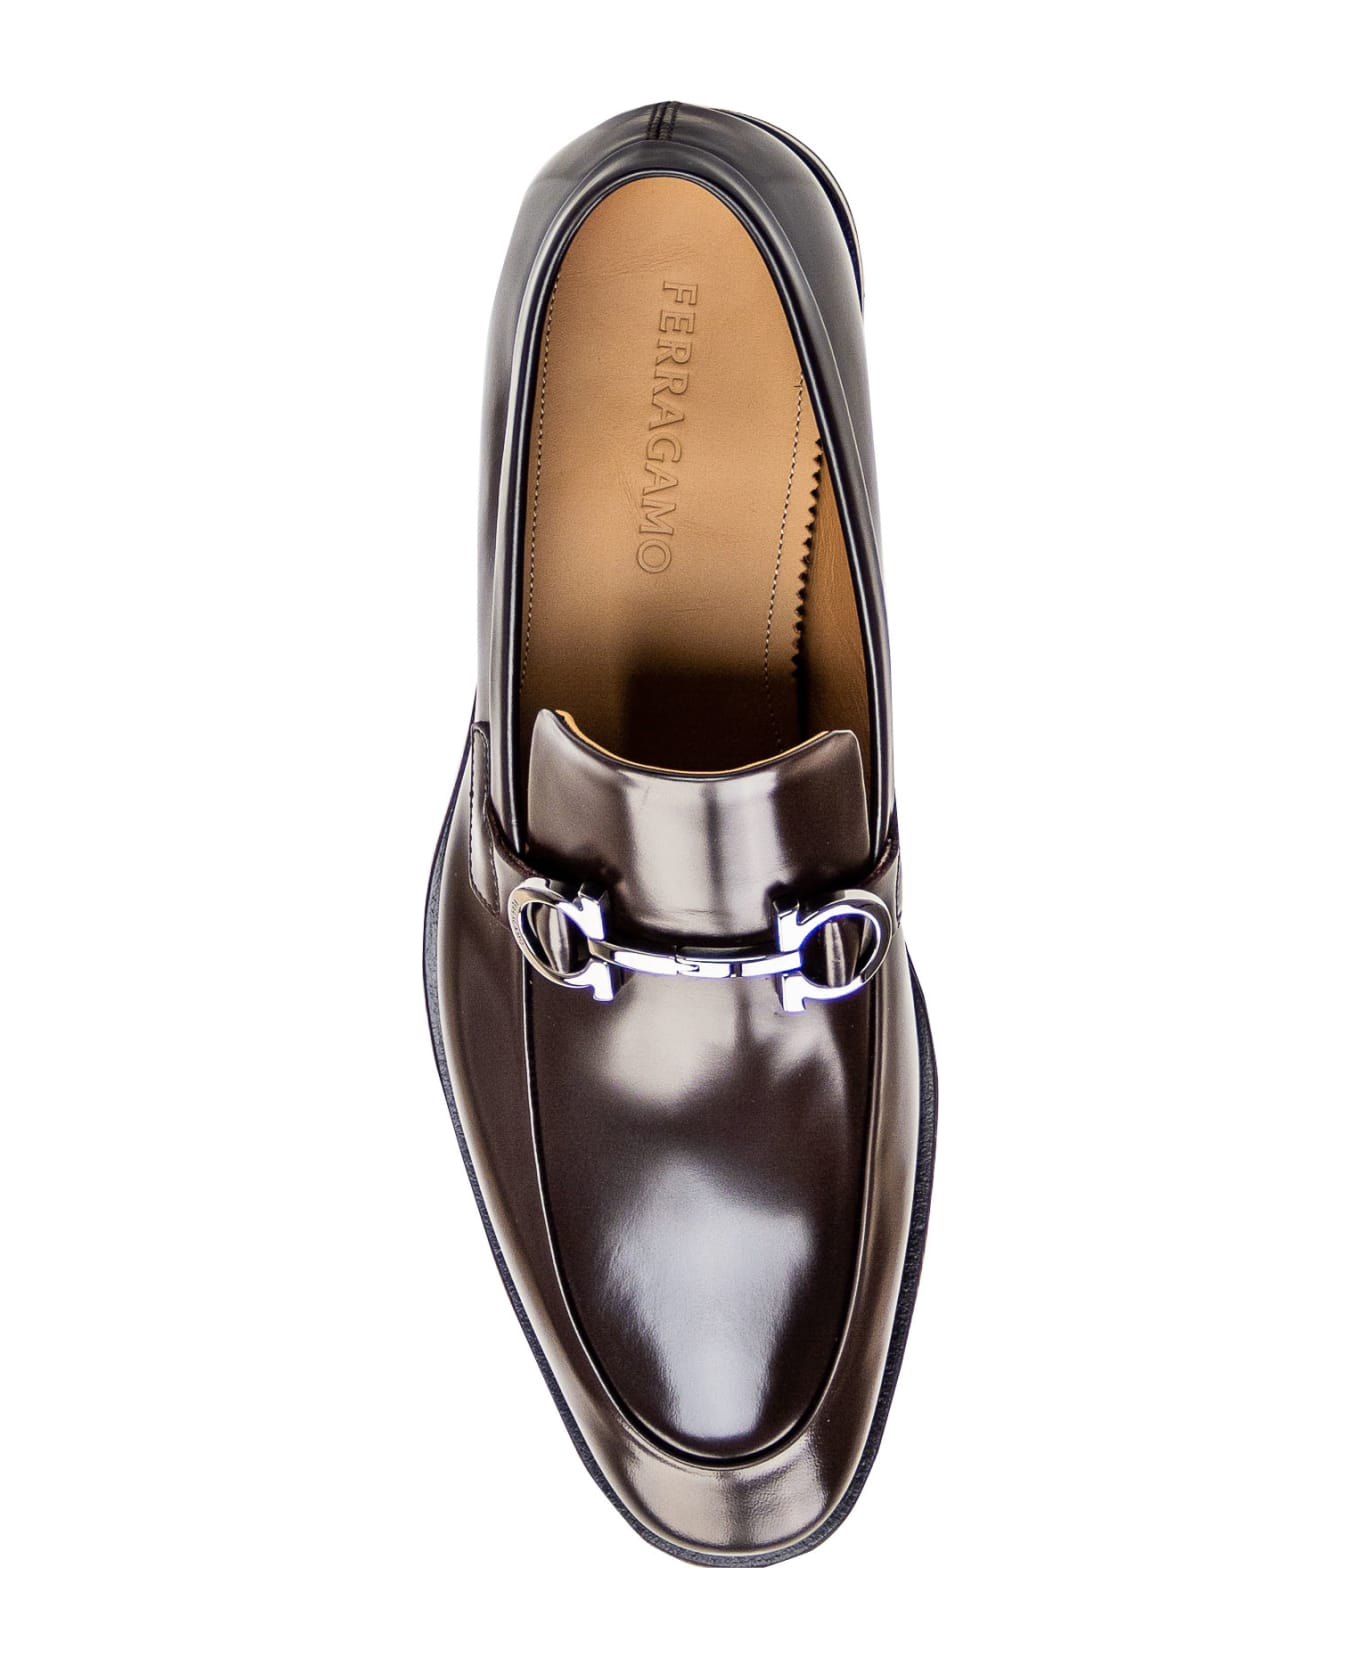 Ferragamo Loafer With Hook Ornament - HICKORY